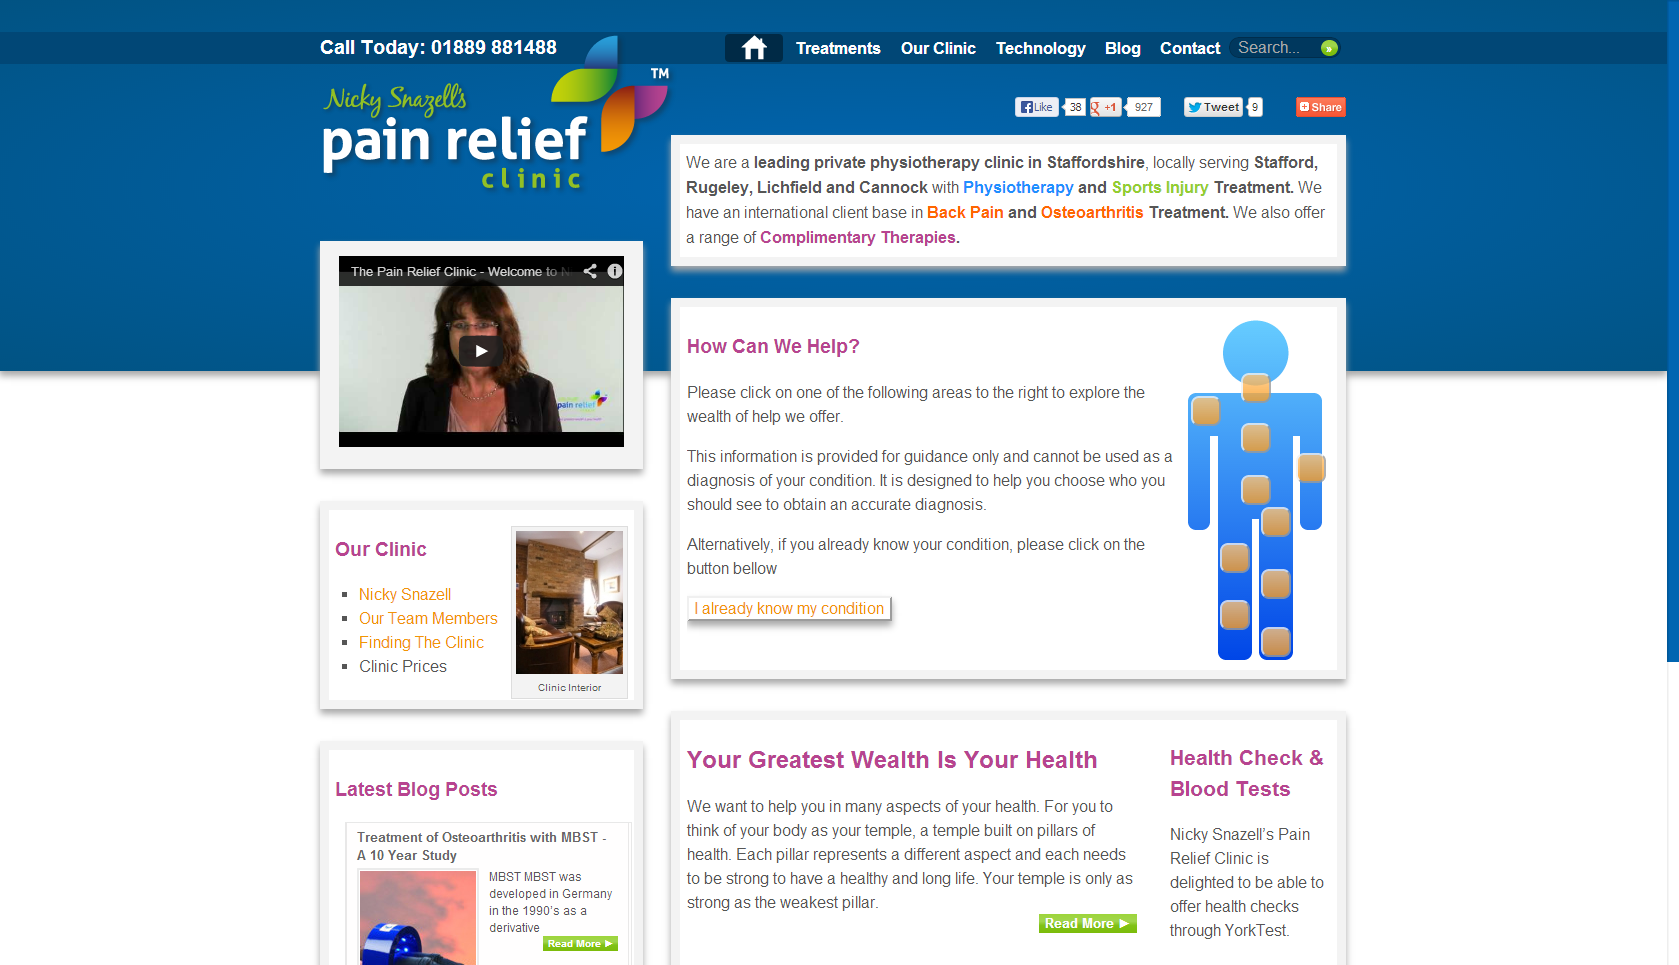 Nicky Snazell's Pain Relief Clinic Website 2013